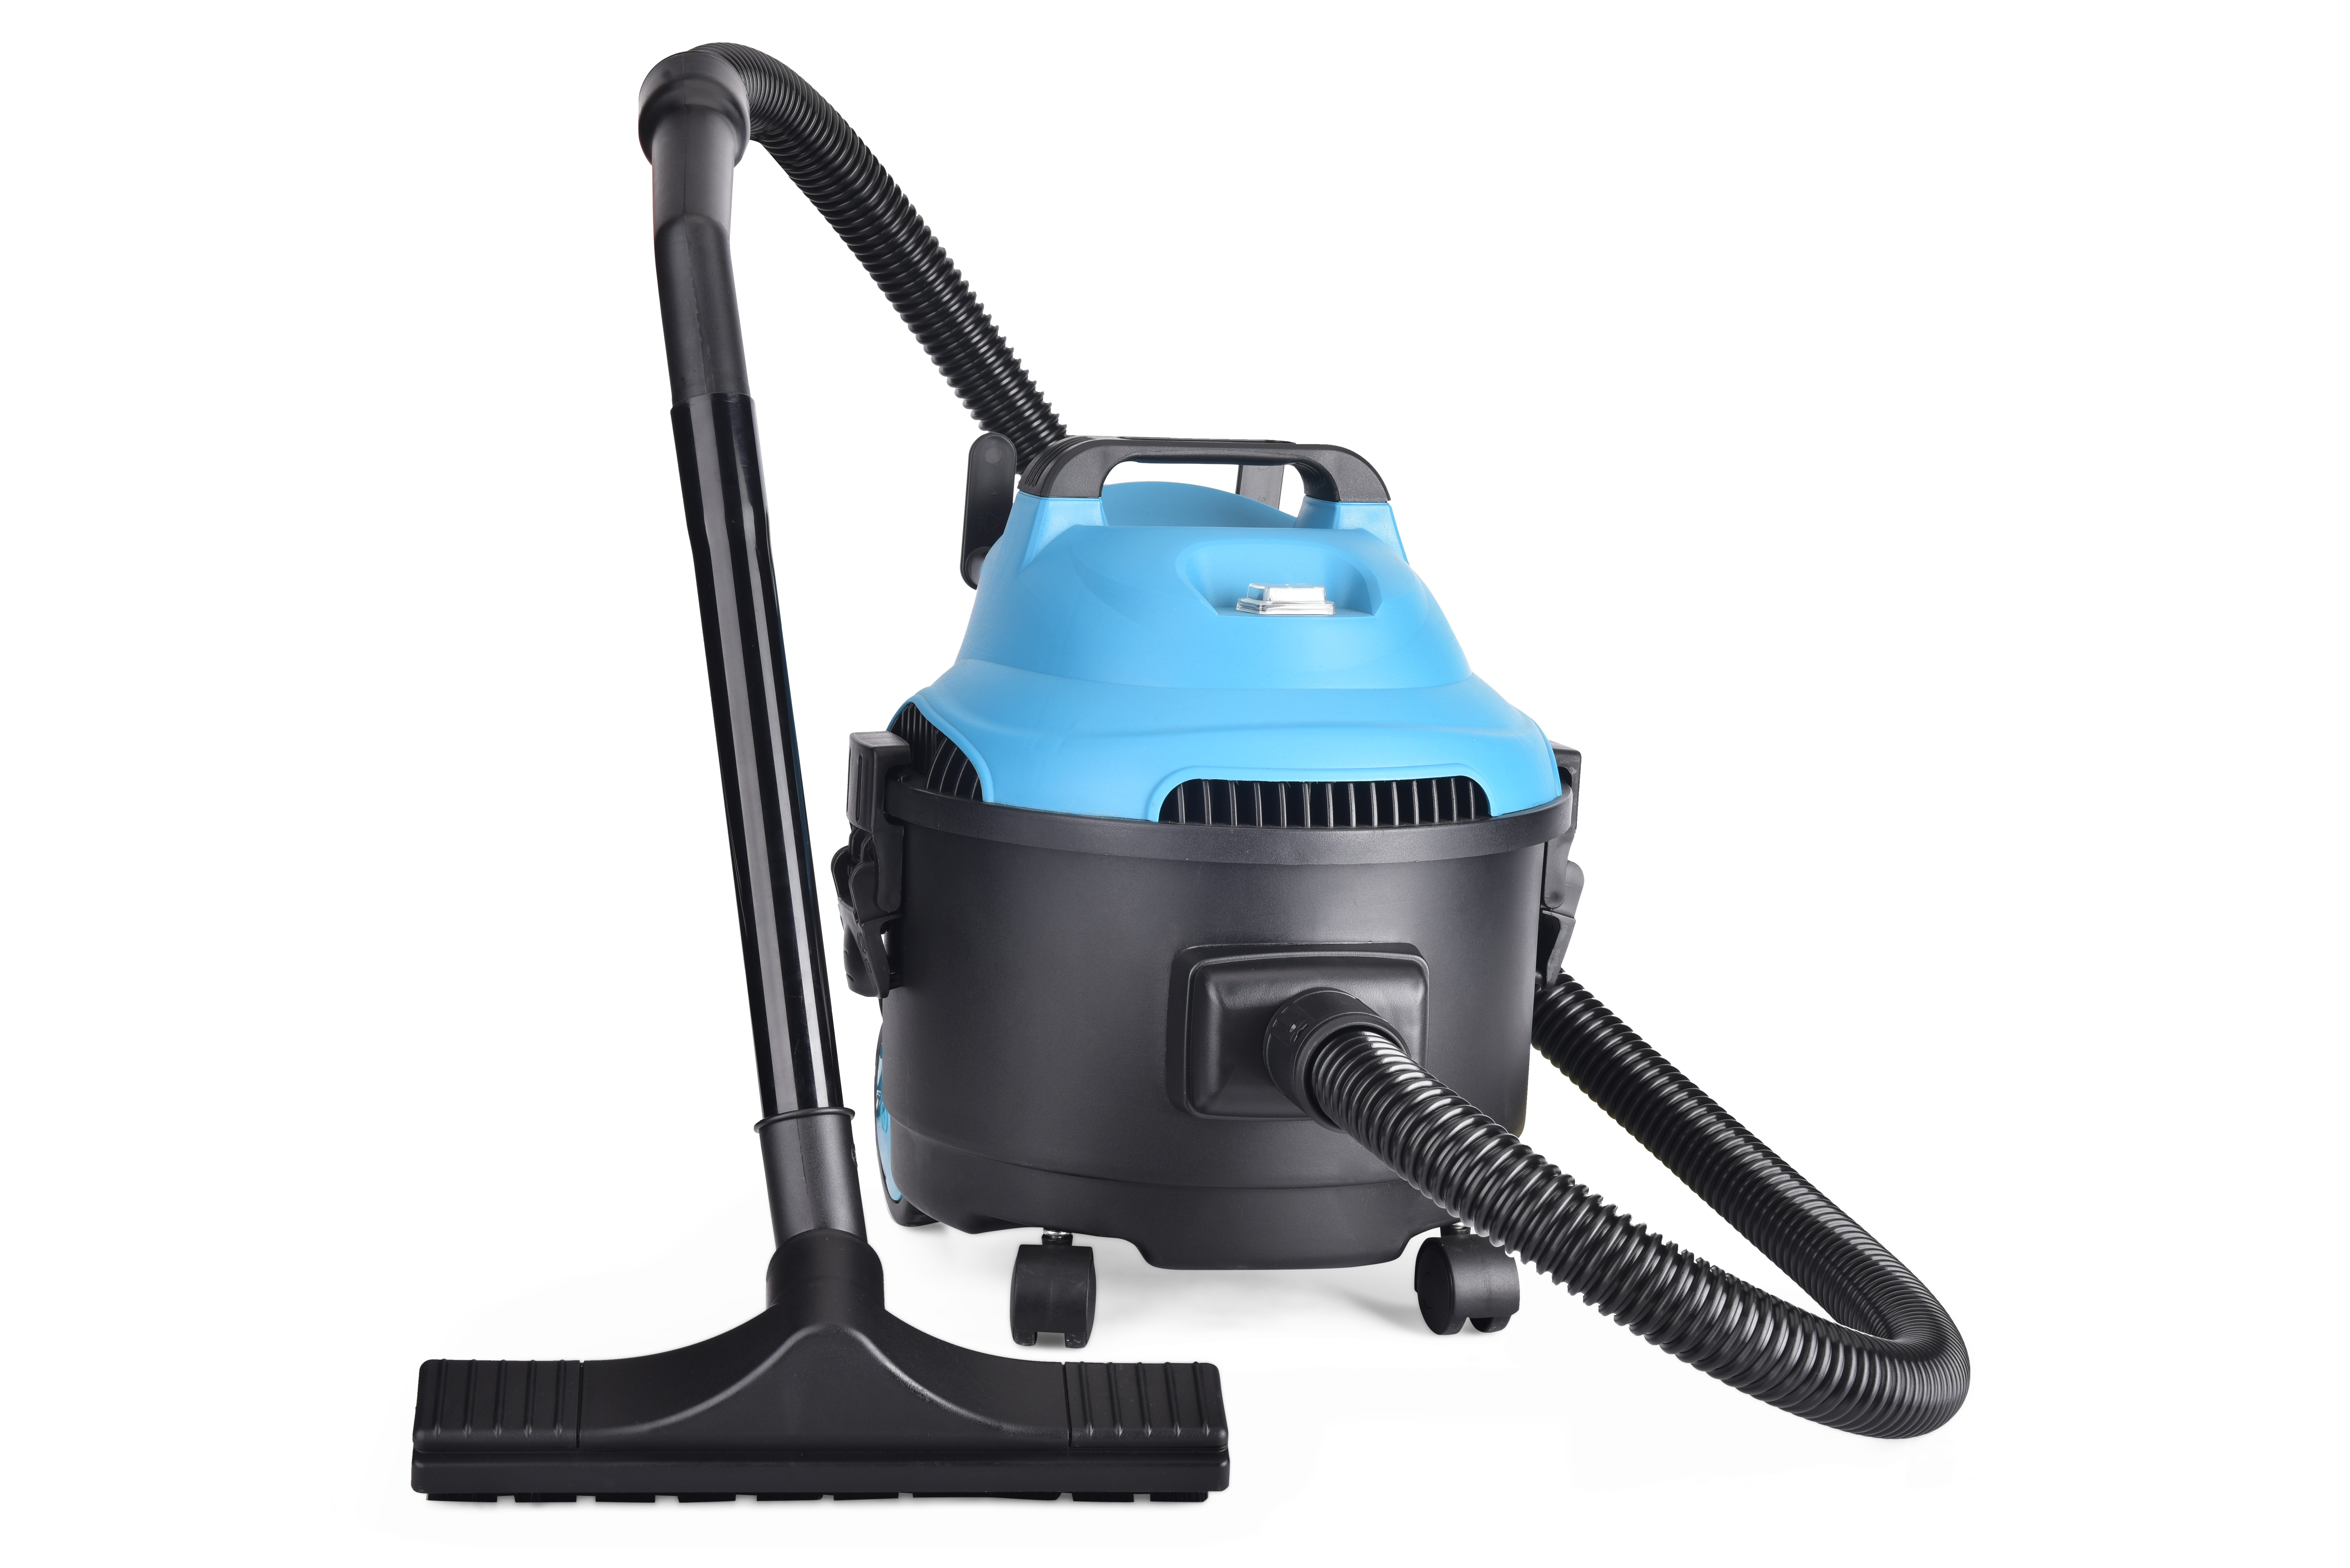 RL175 portable dust sweeper small office desktop clean machine multicolor table mini vacuum cleaner